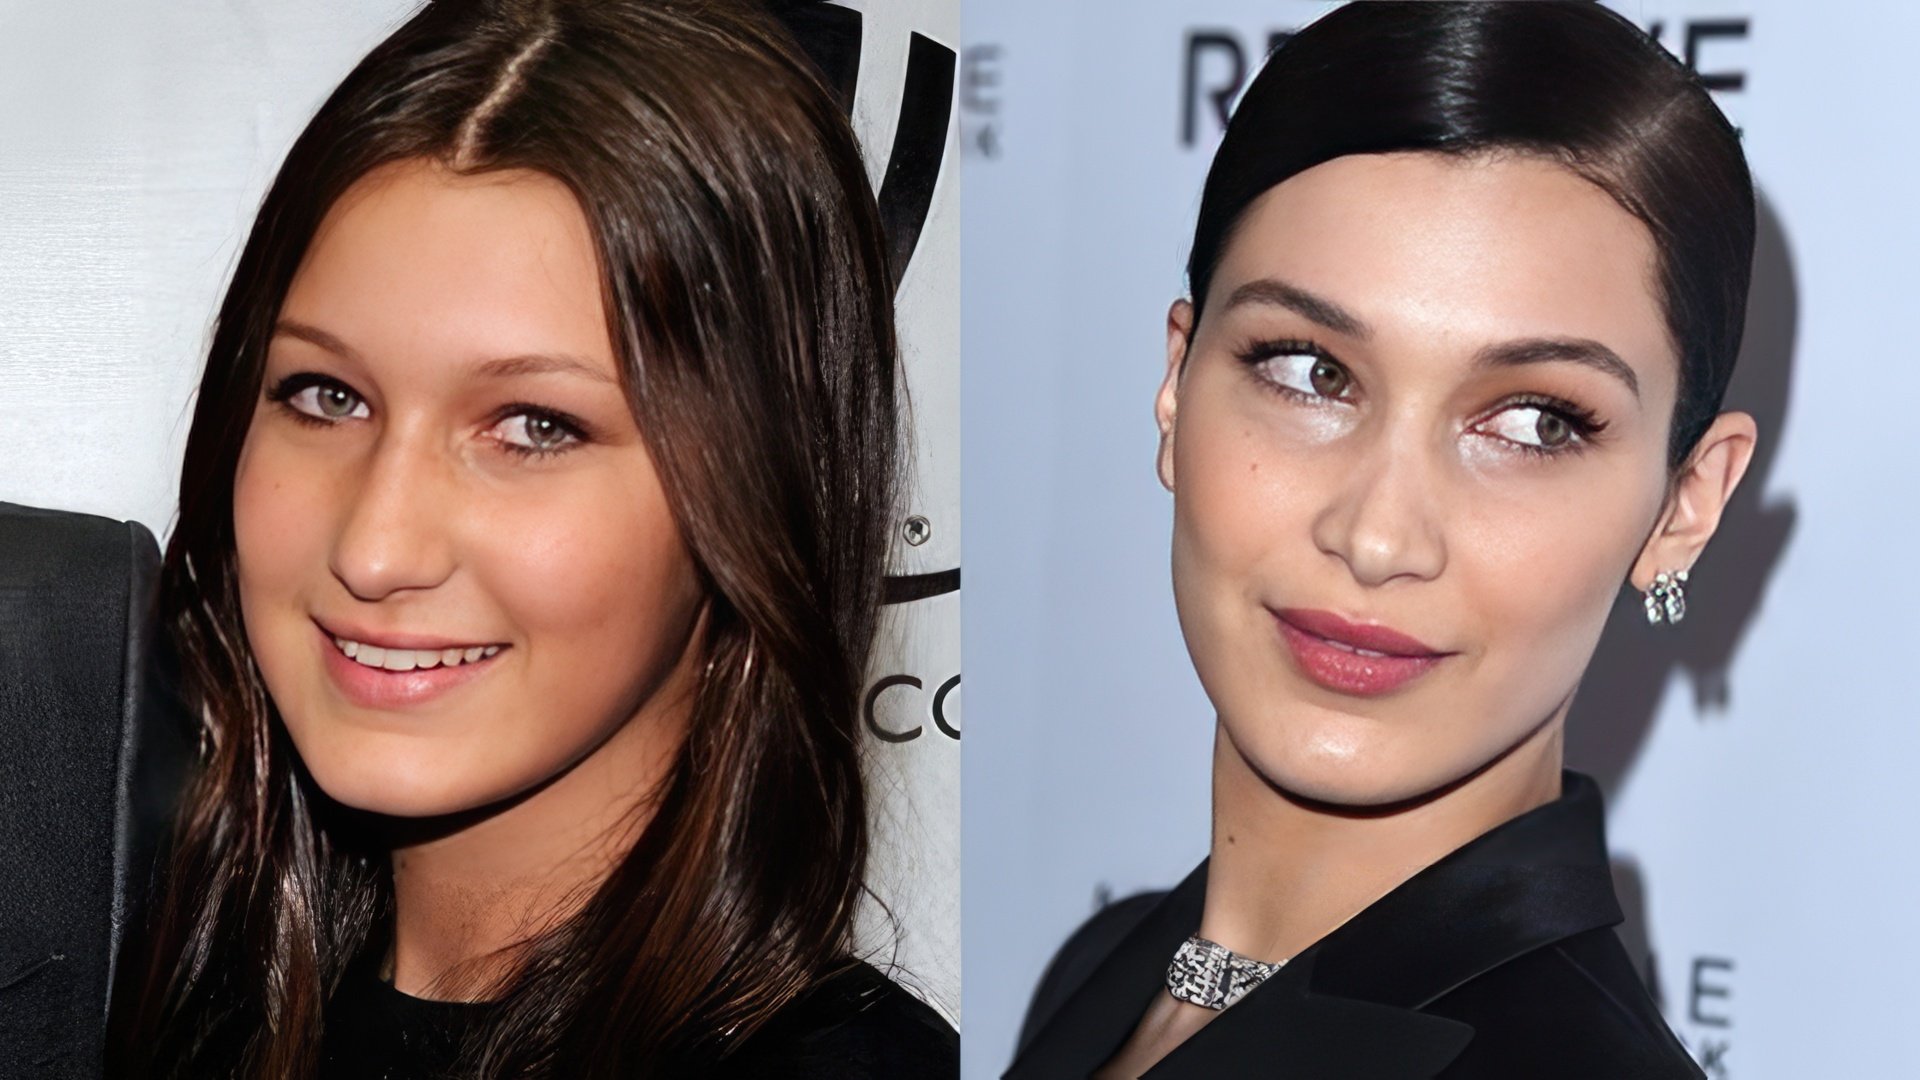 Bella Hadid before and after plastic surgery